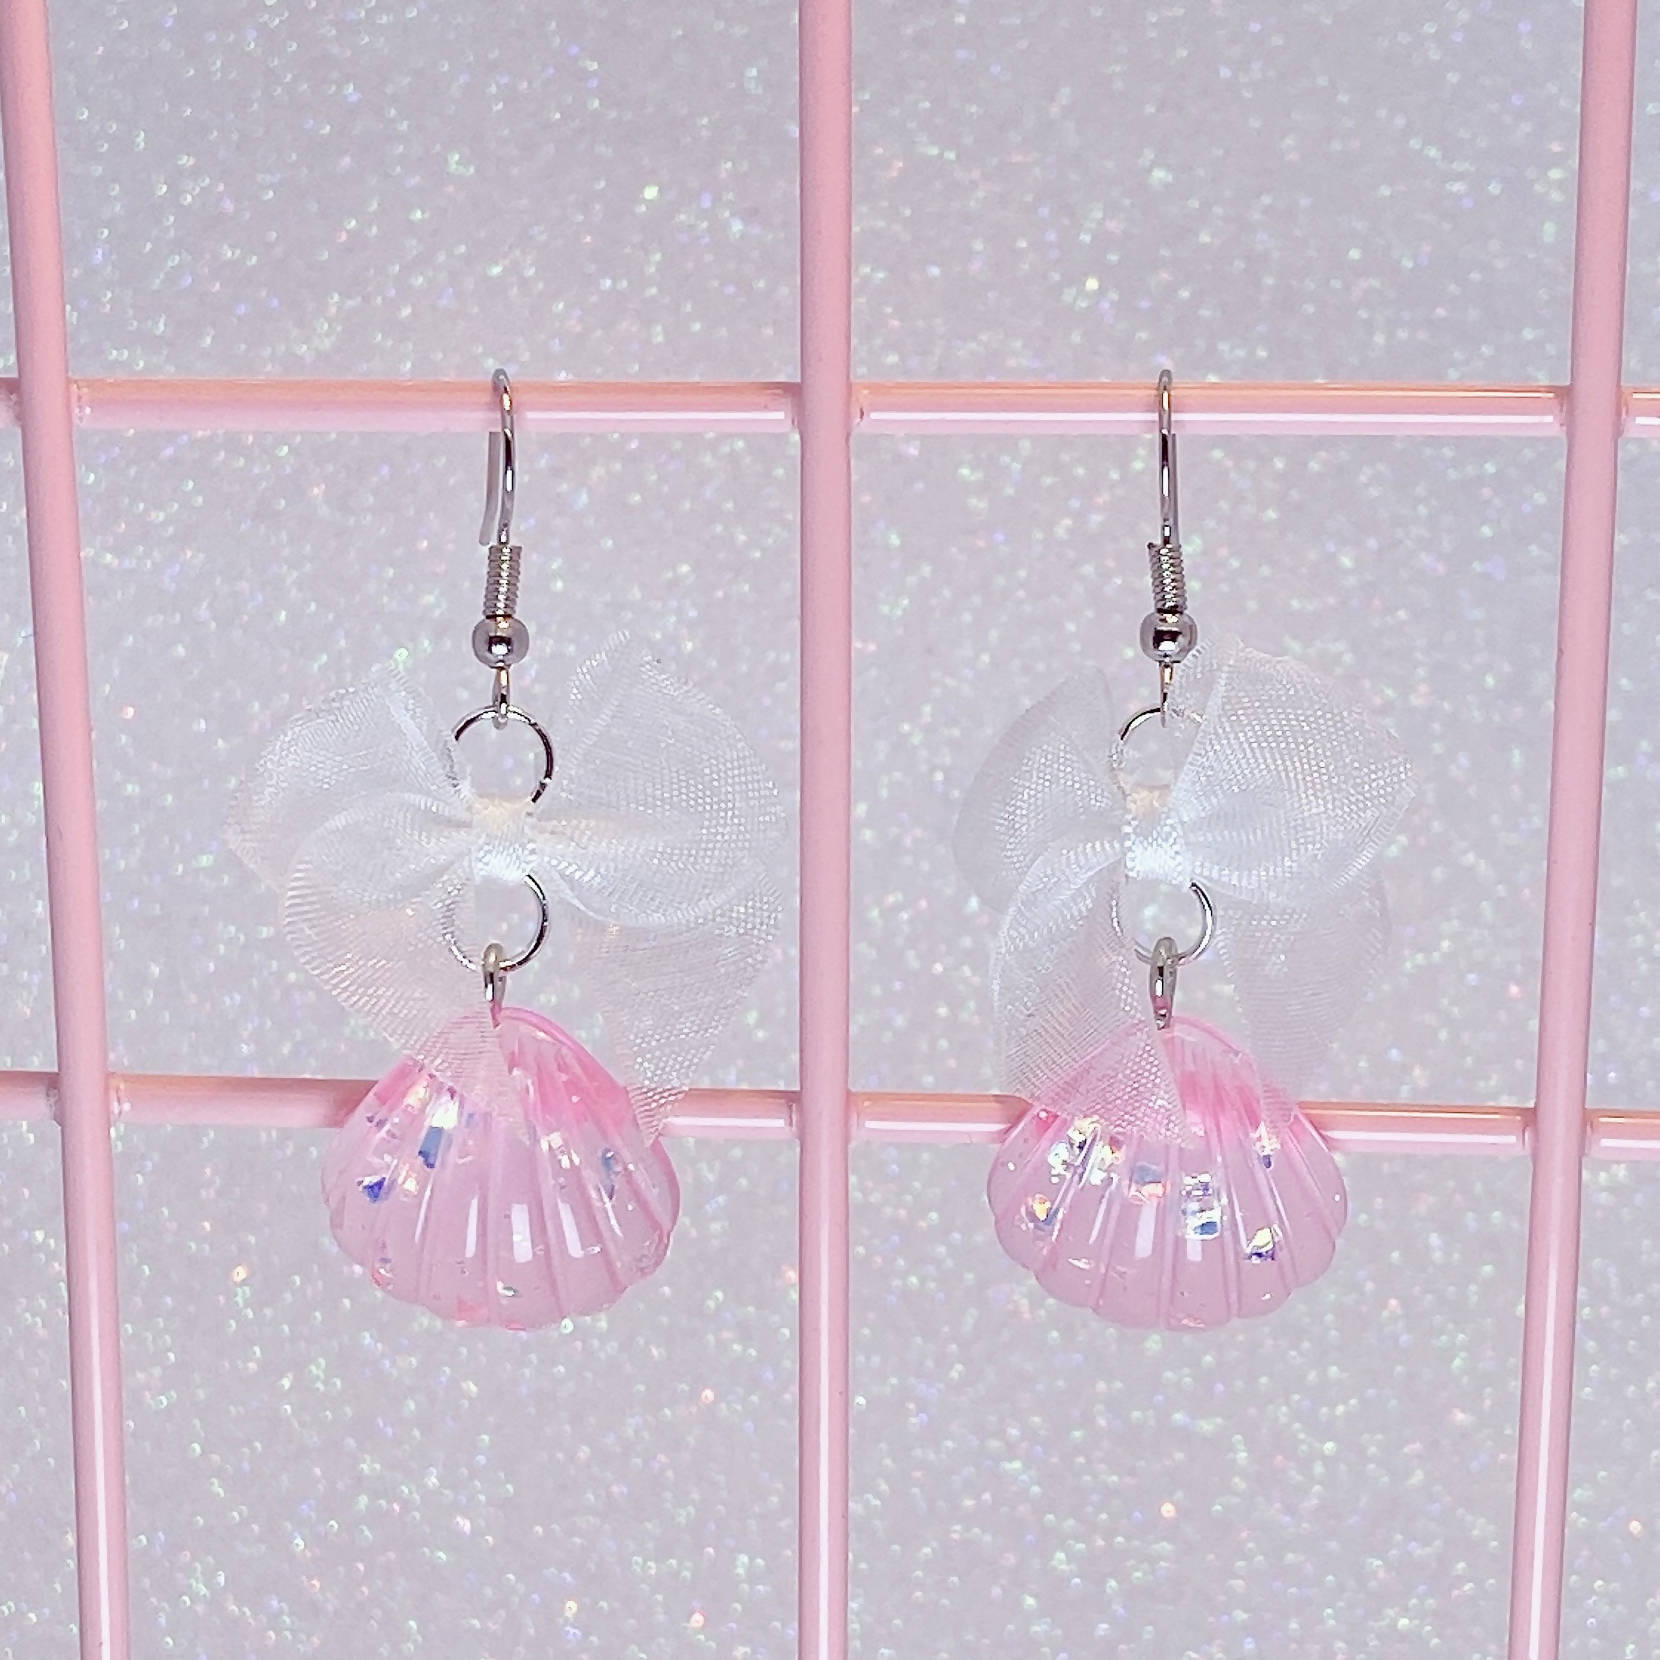 Sparkly Seashell Earrings (5 Colors) - Lolita Collective